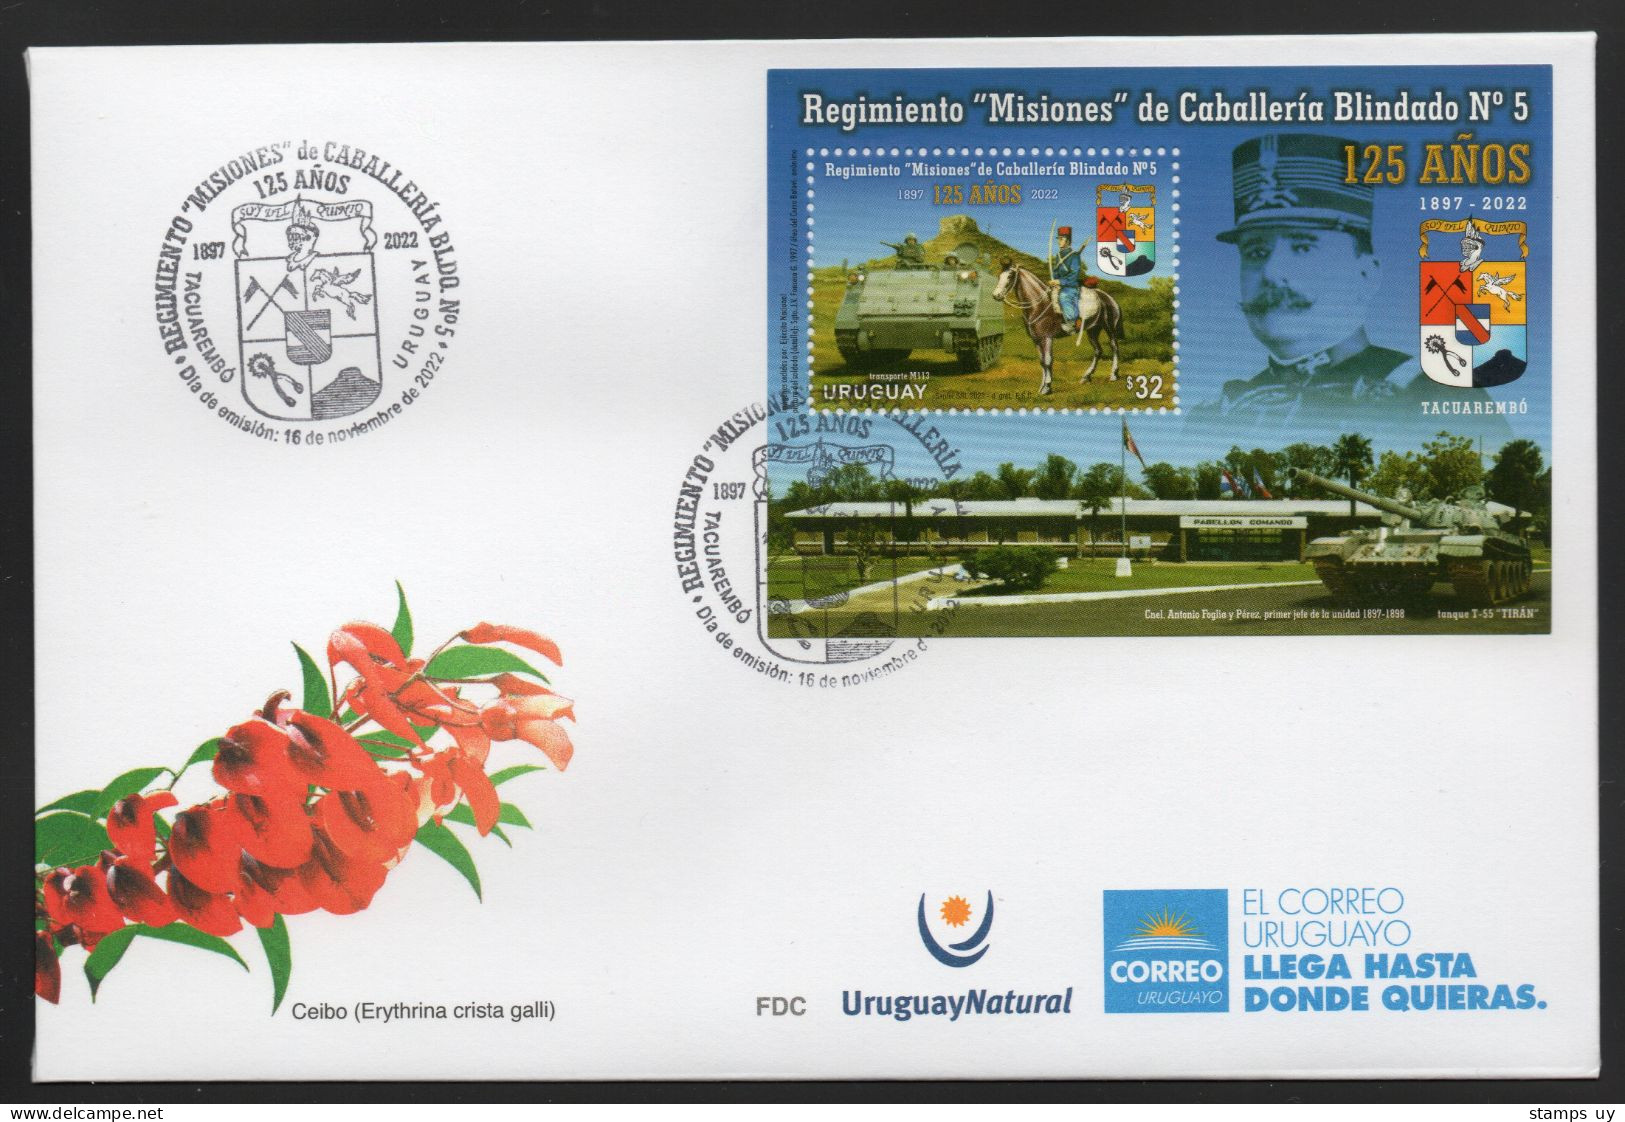 URUGUAY 2022 (Militar, Tanks, Tiran Ti 67, T-55, Armored Vehicles, M113, Winged Horses, Hills, Coat Of Arms) - 1 FDC - Montagne